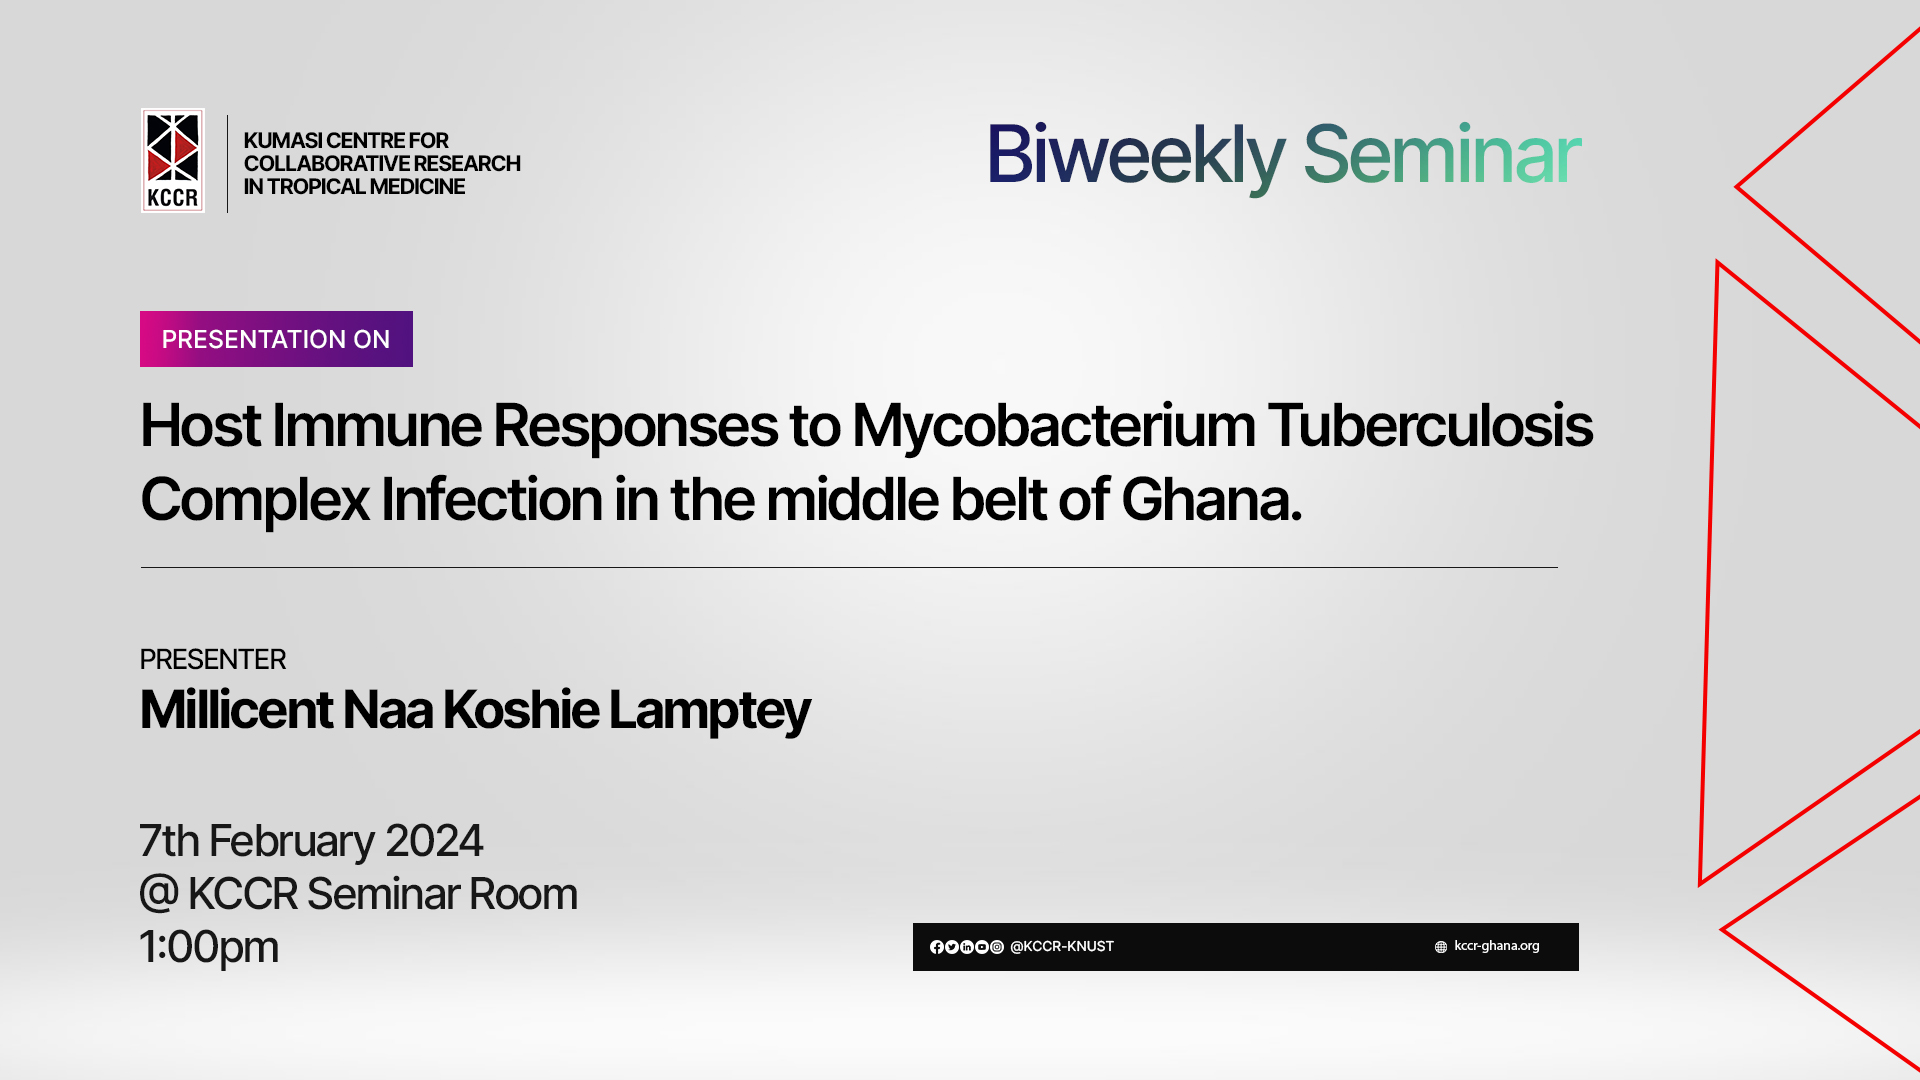 Presentation on Host Immune Responses to Mycobacterium TuberculosisComplex Infection in the middle belt of Ghana.